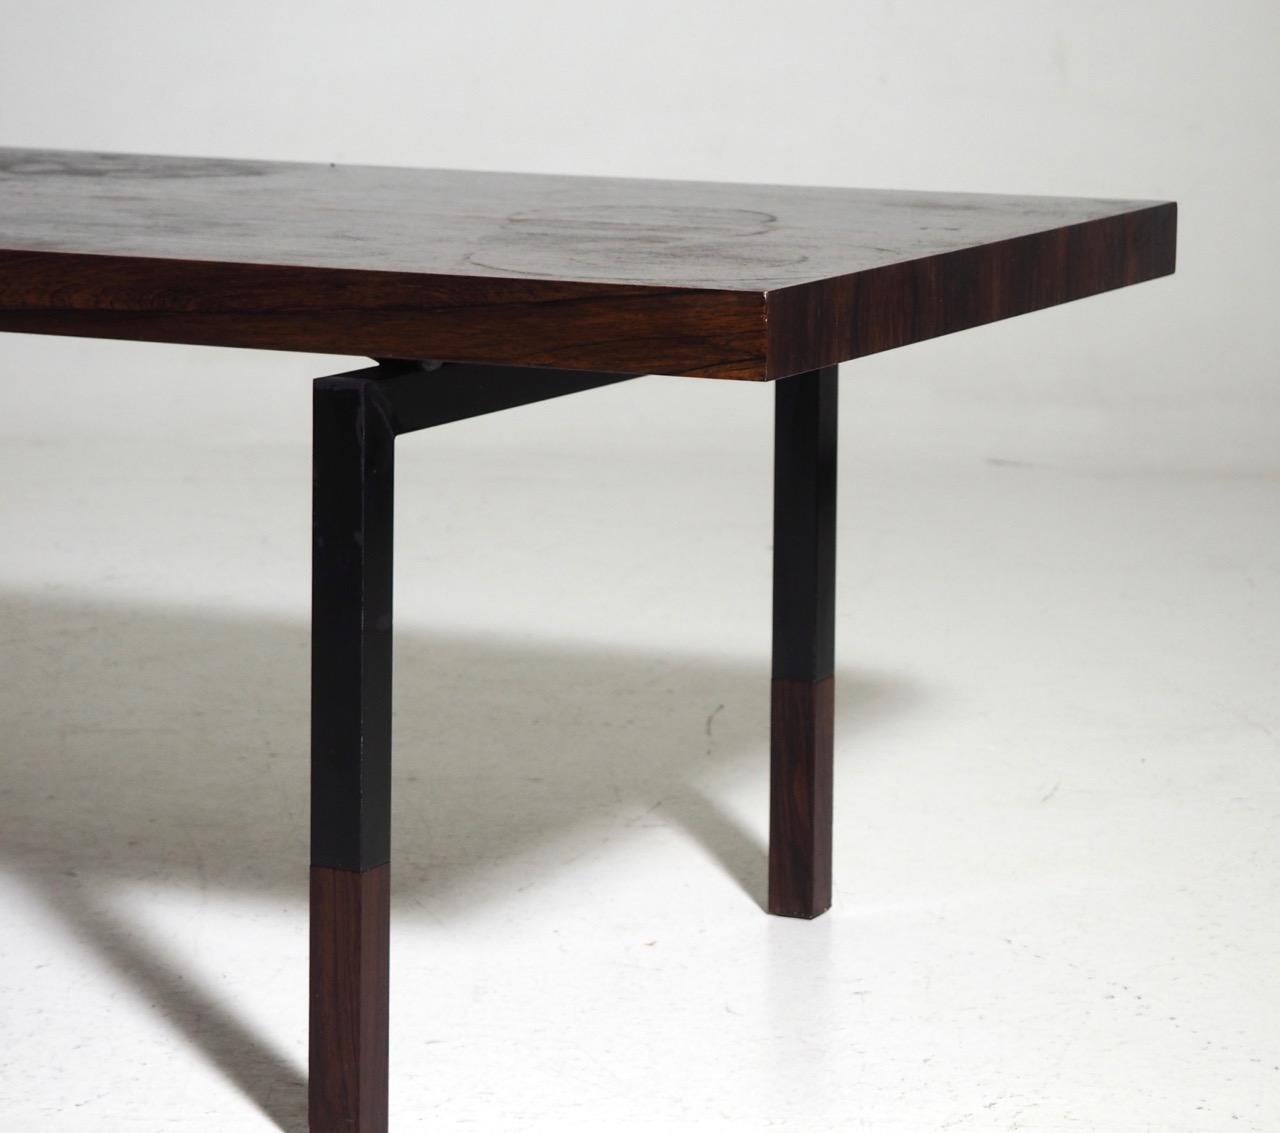 20th Century Rare Coffee Table in Rosewood, Danish Architect, circa 1960 For Sale